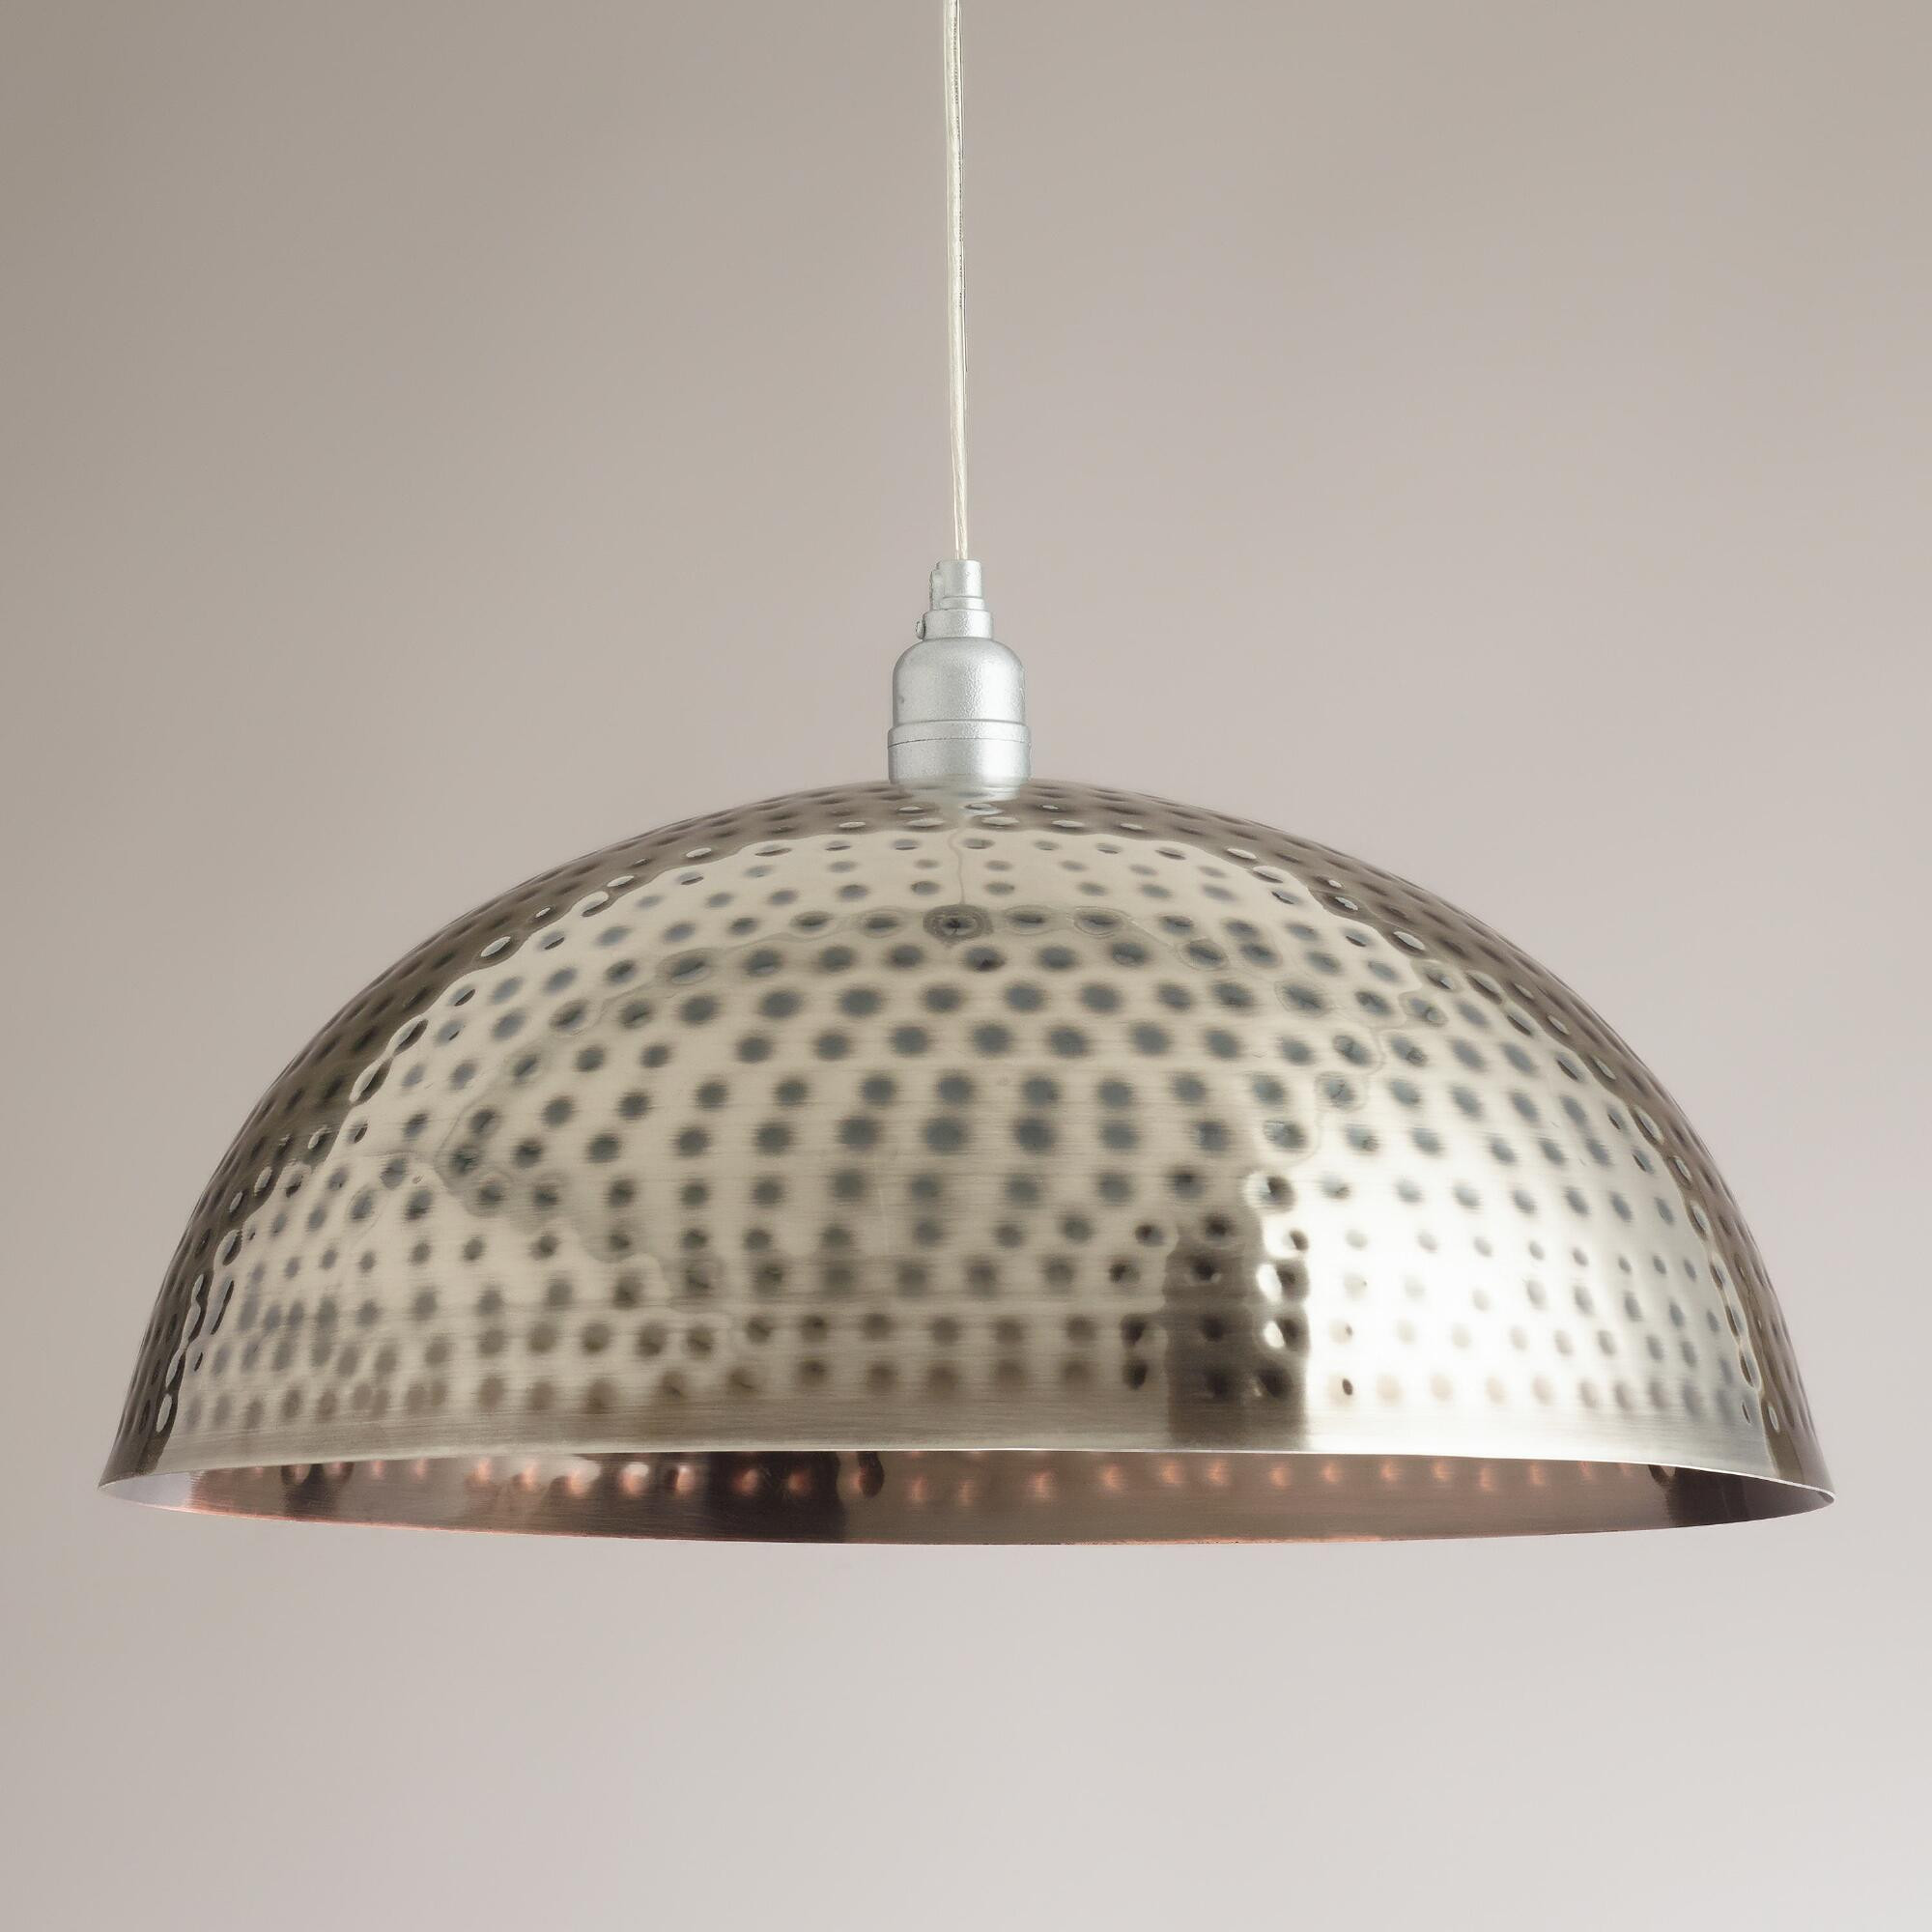 Best ideas about World Market Lighting
. Save or Pin Hammered Metal Pendant Lamp Now.